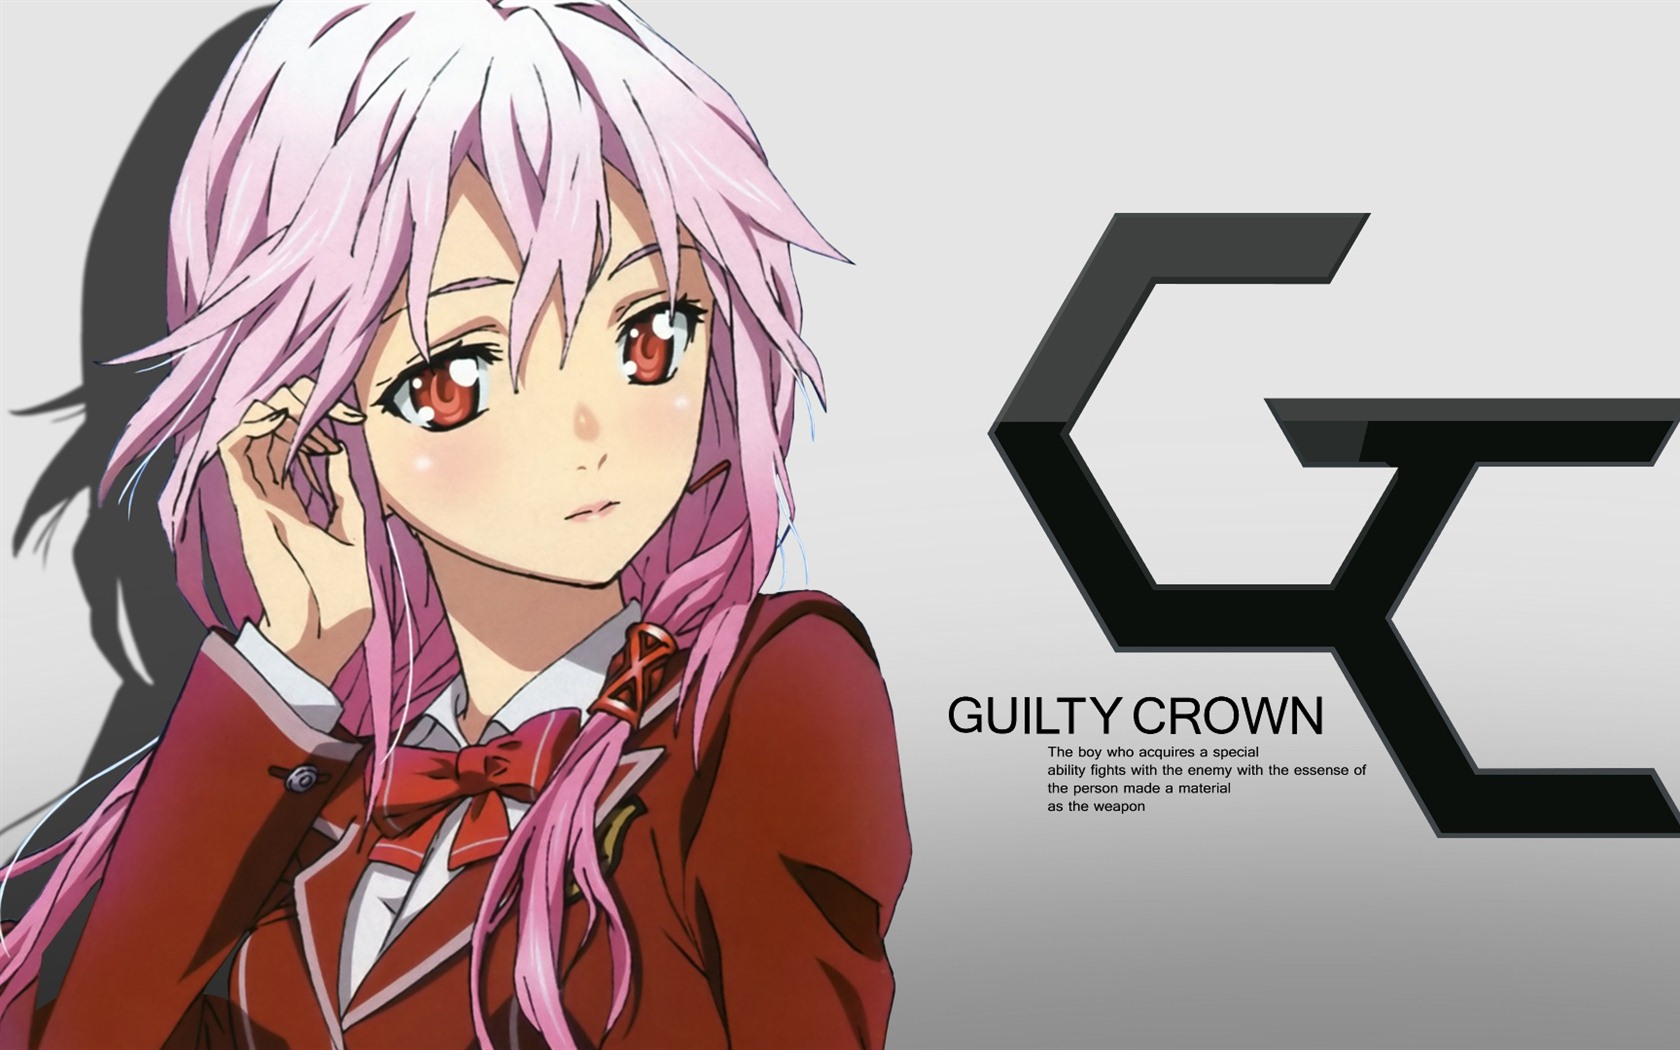 Guilty Crown 罪恶王冠 高清壁纸8 - 1680x1050